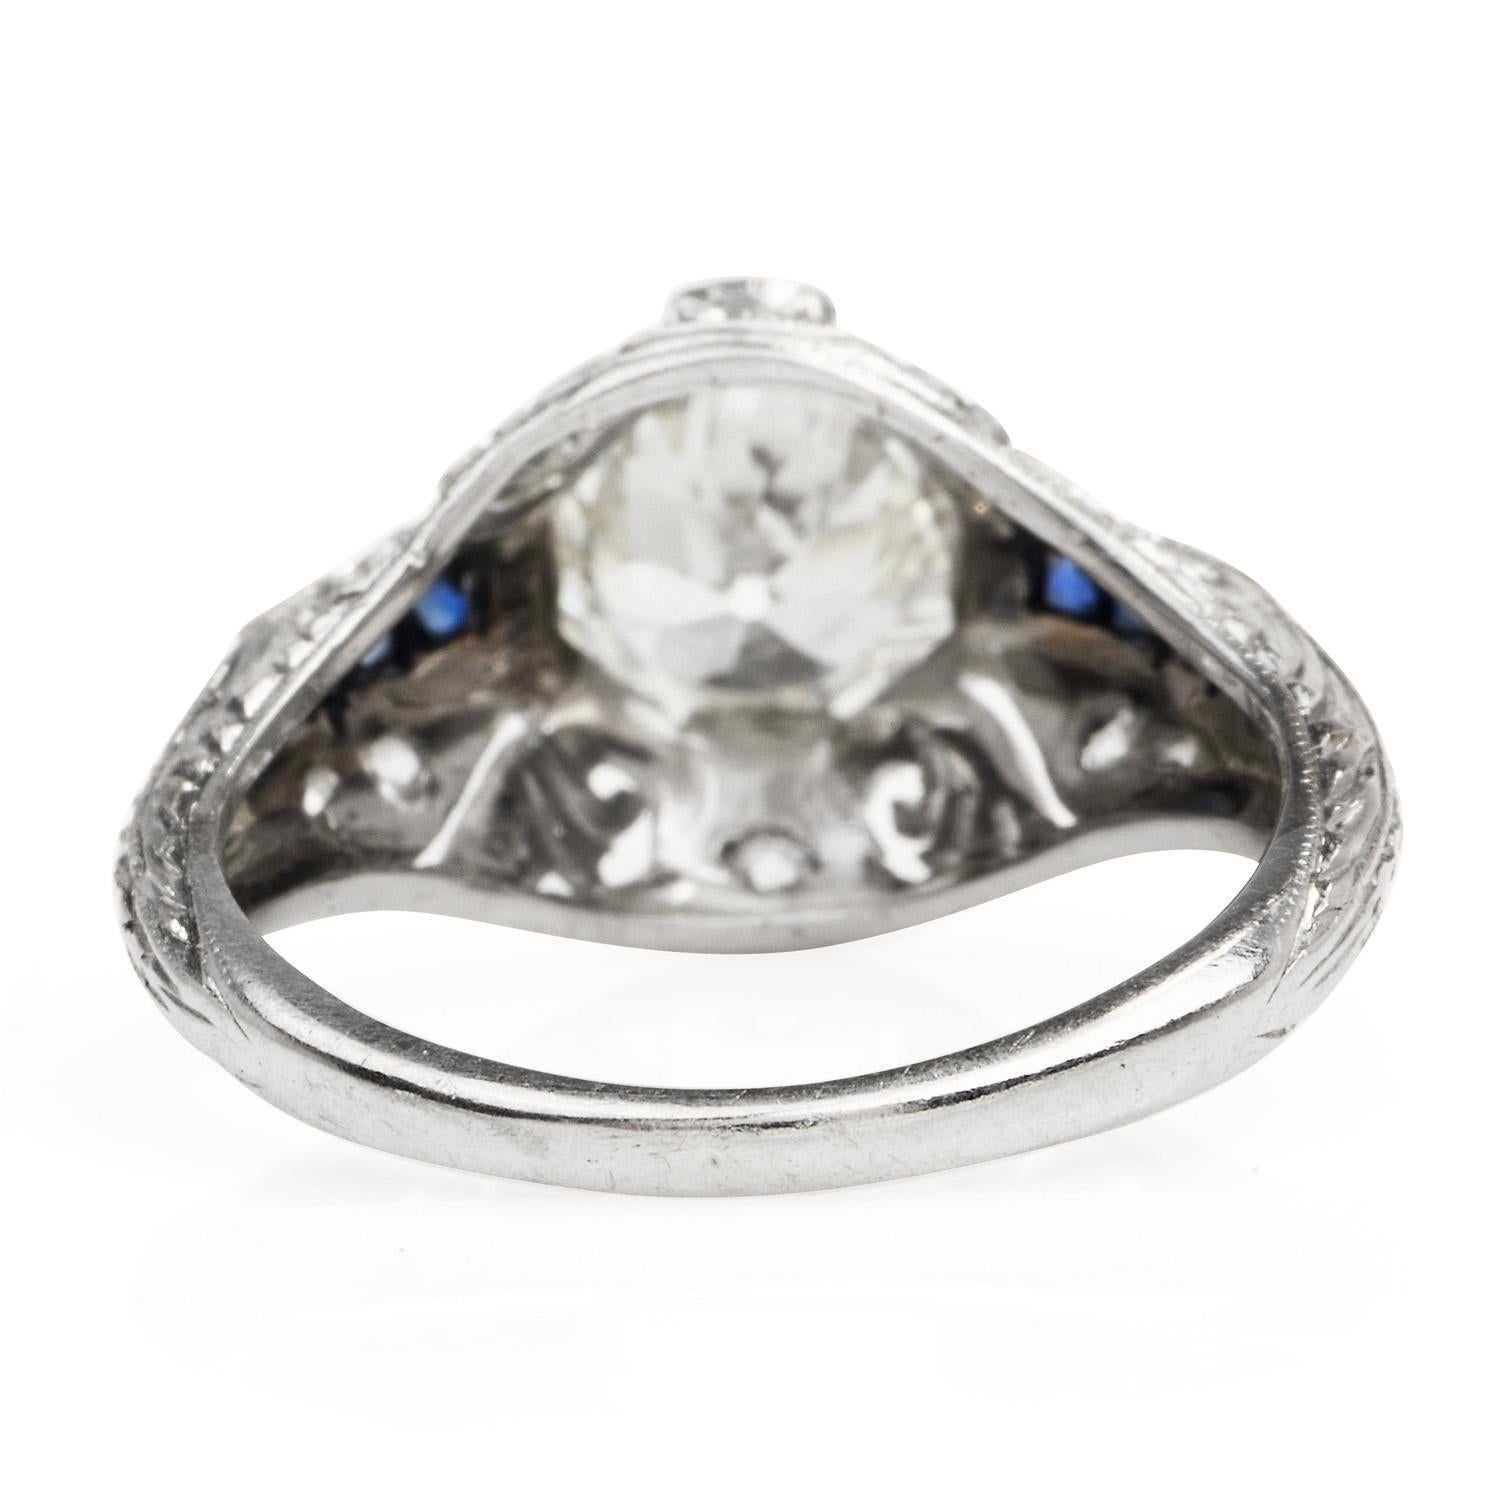 Antique Art Deco Diamond Blue Sapphire Filigree Engagement Ring In Excellent Condition For Sale In Miami, FL